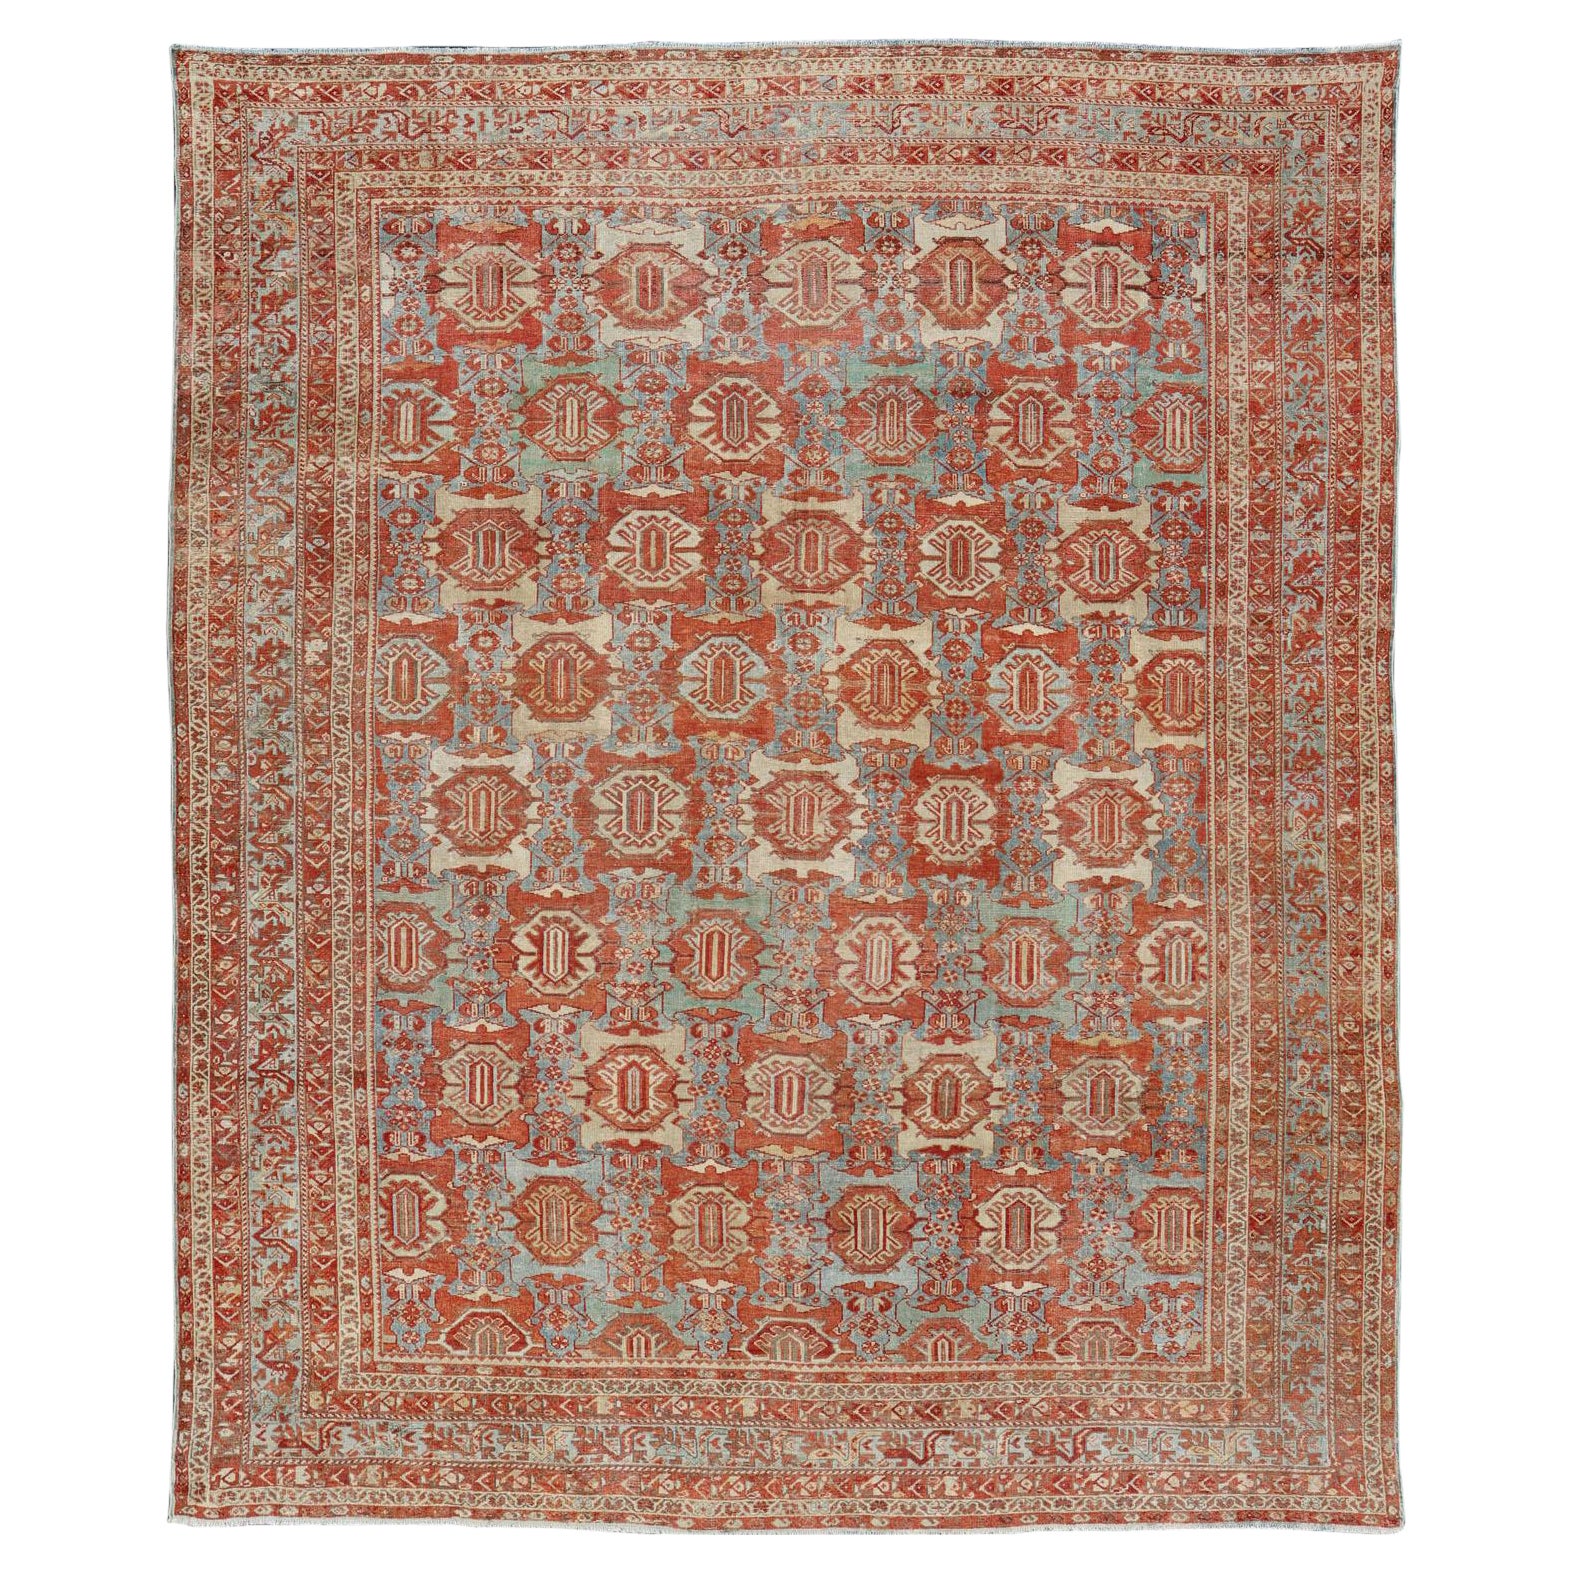 Large Scale Antique Persian Hamedan Rug with Colorful Blossom Design For Sale